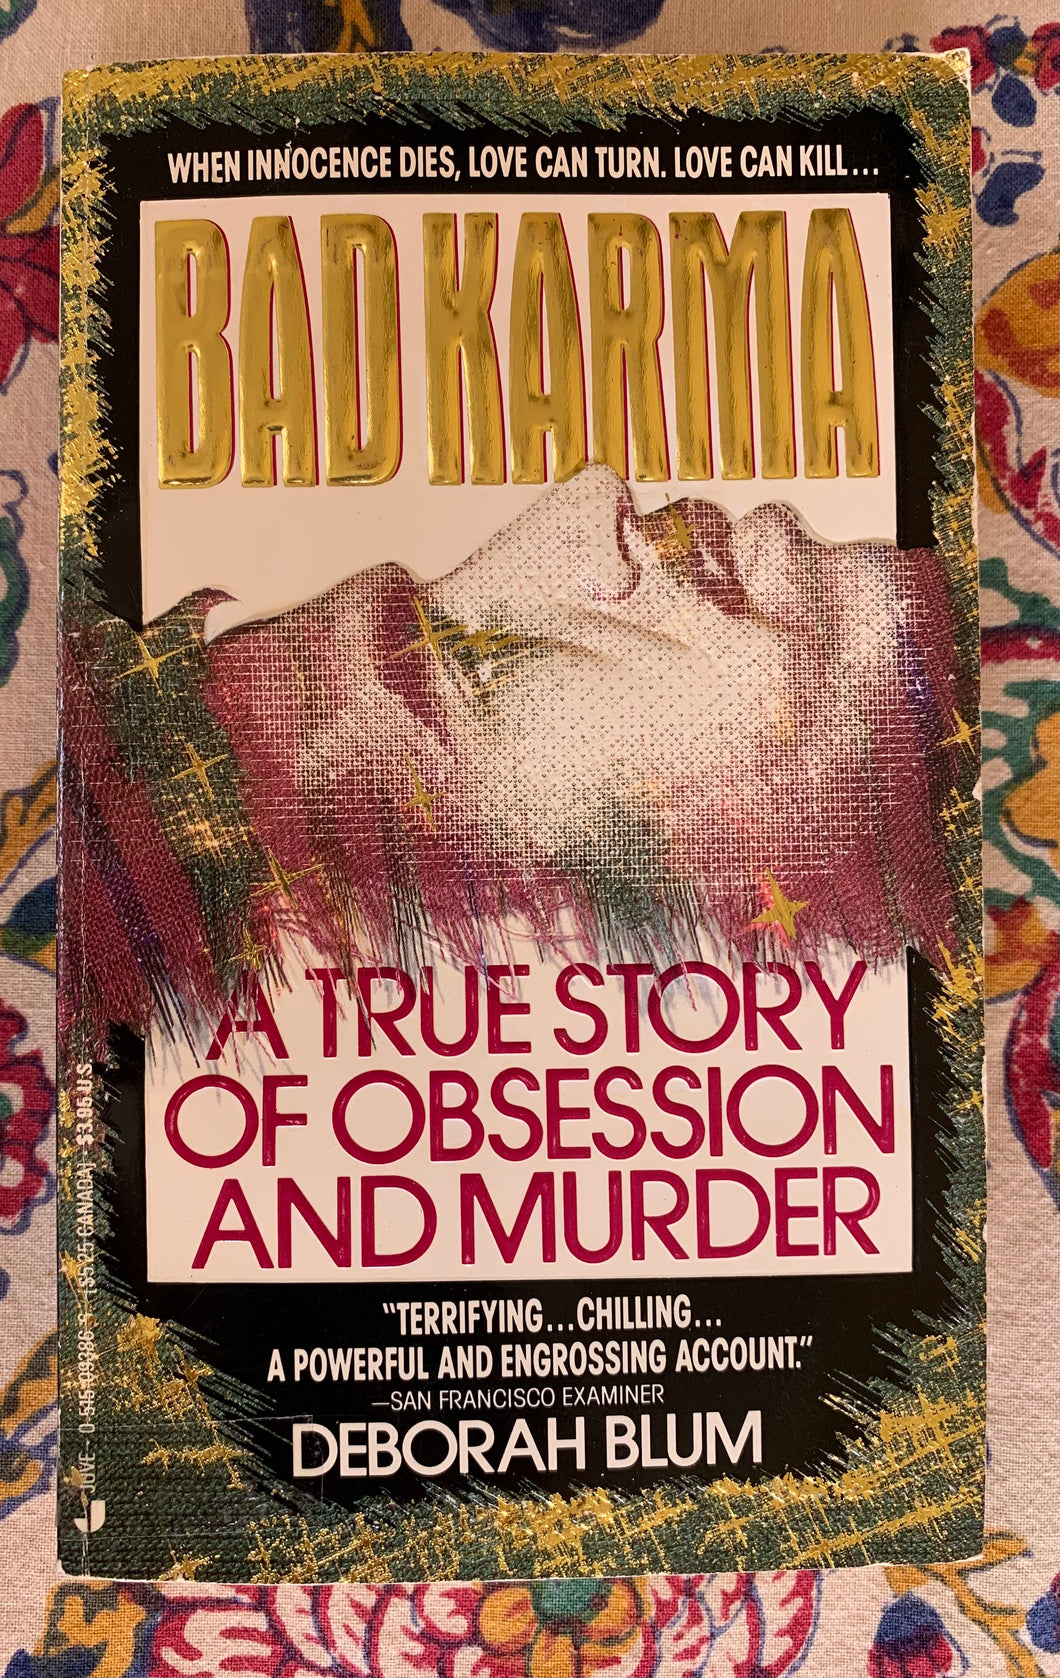 Bad Karma: A True Story of Obsession and Murder